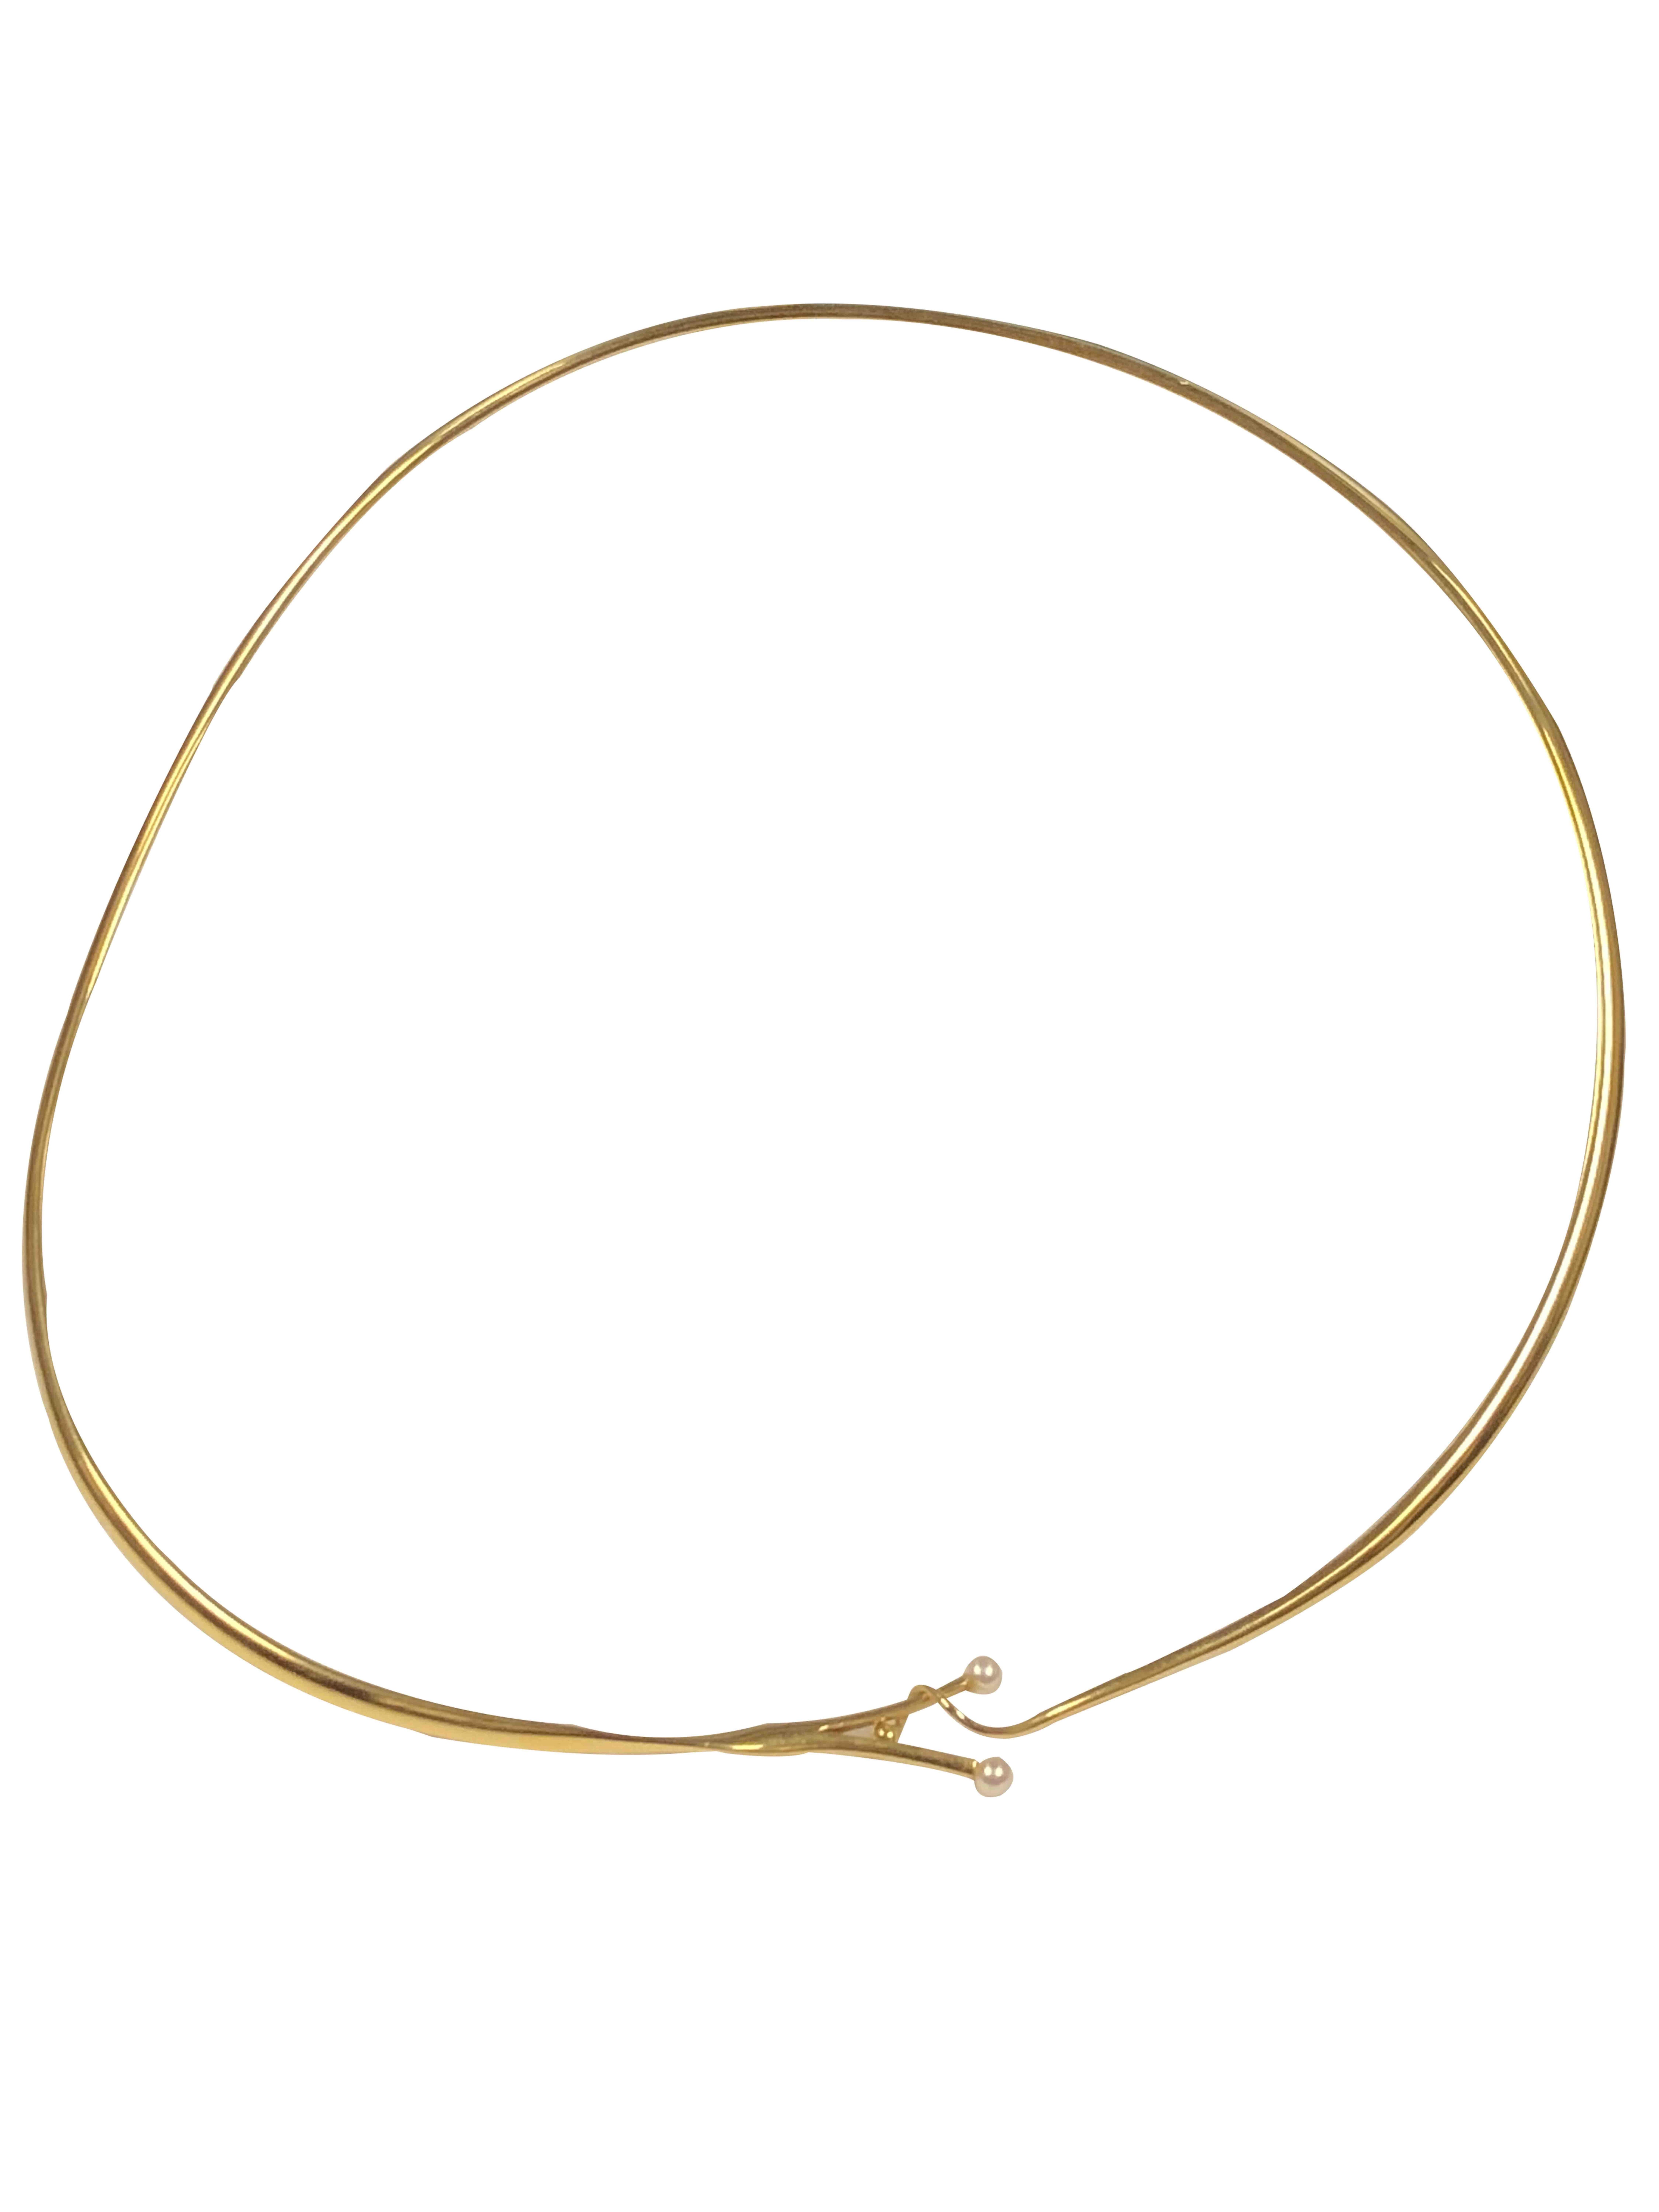 Circa 1980 Vivianna Torun for Jeorg Jensen # 904 18K Yellow Gold torque style necklace, measuring 3 M.M. wide 2 M.M. thick, 19 inches Diameter and weighing 26 Grams. Set with two 2.5 M.M. Pearls. Comes in original presentation Box.